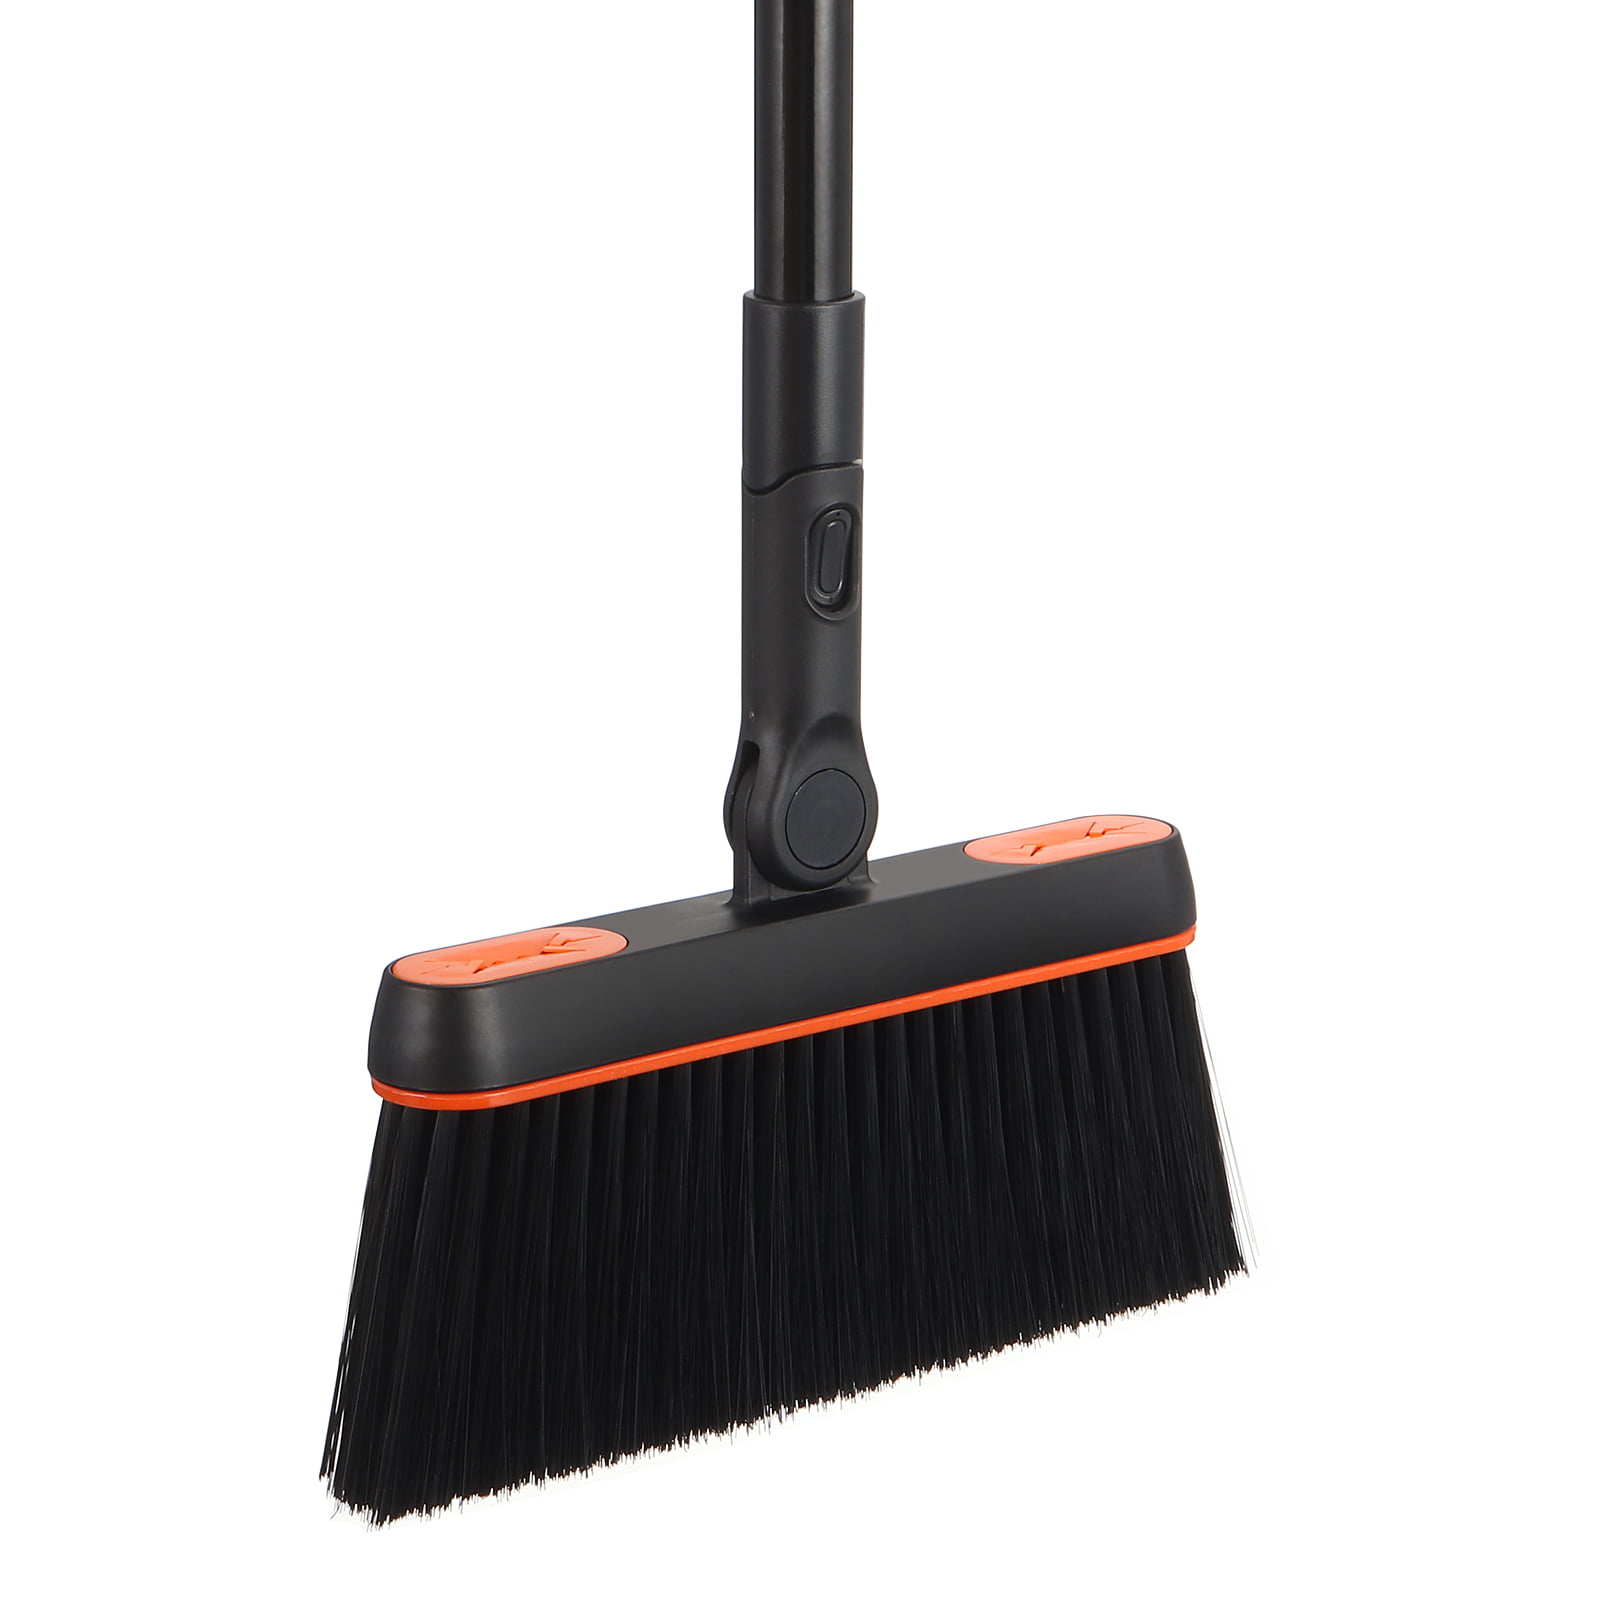 Broom and Dustpan Sets with Long Handle,Folding Upright Standing Upright Storage Lengthen Comb Teeth Broom 180°Rotating Broom Head Cleaning Set for Home